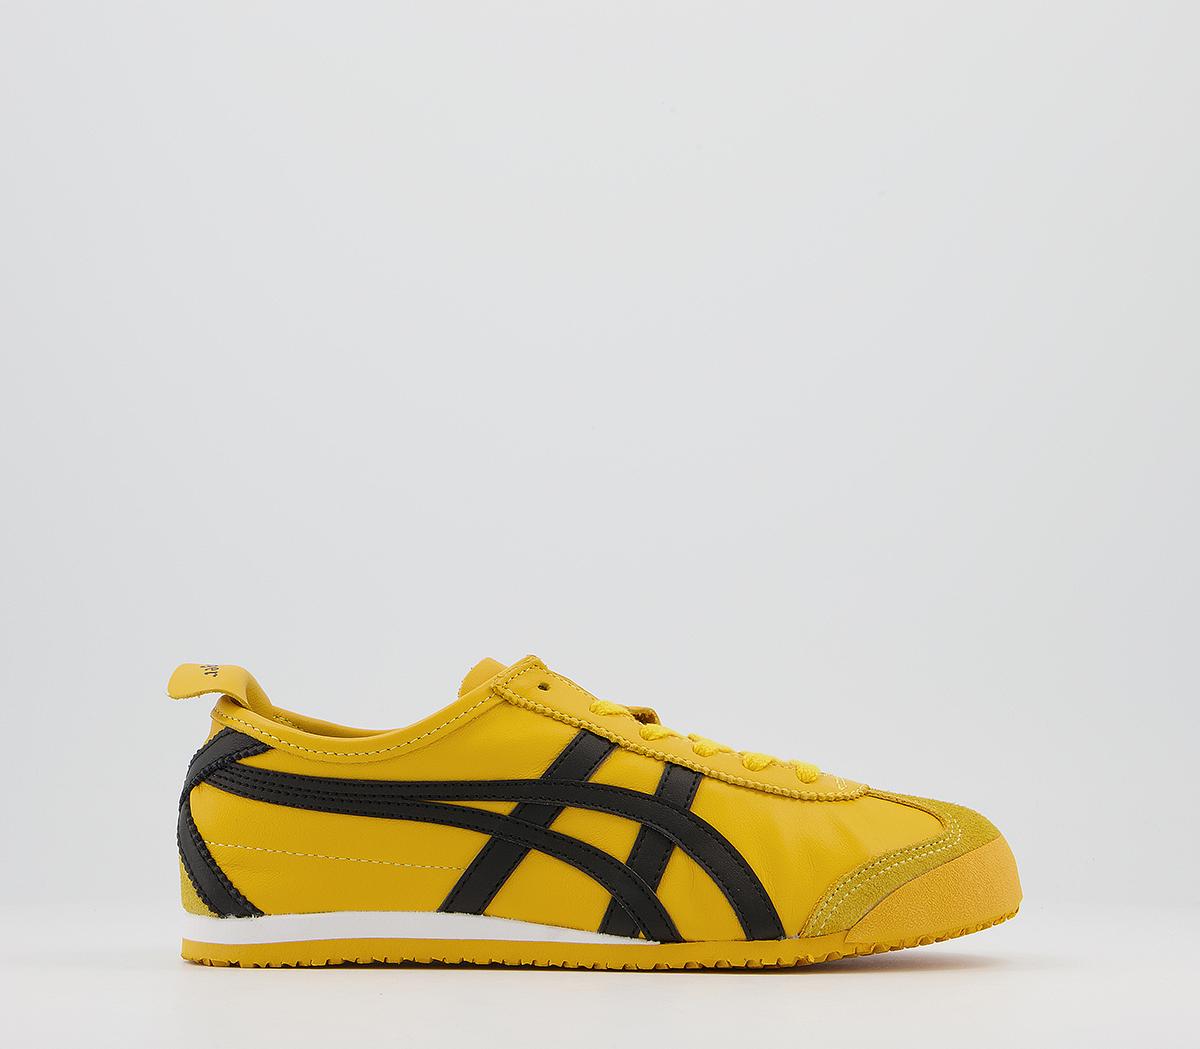 Onitsuka Tiger Mexico 66 Trainers Yellow Black Unisex Sports